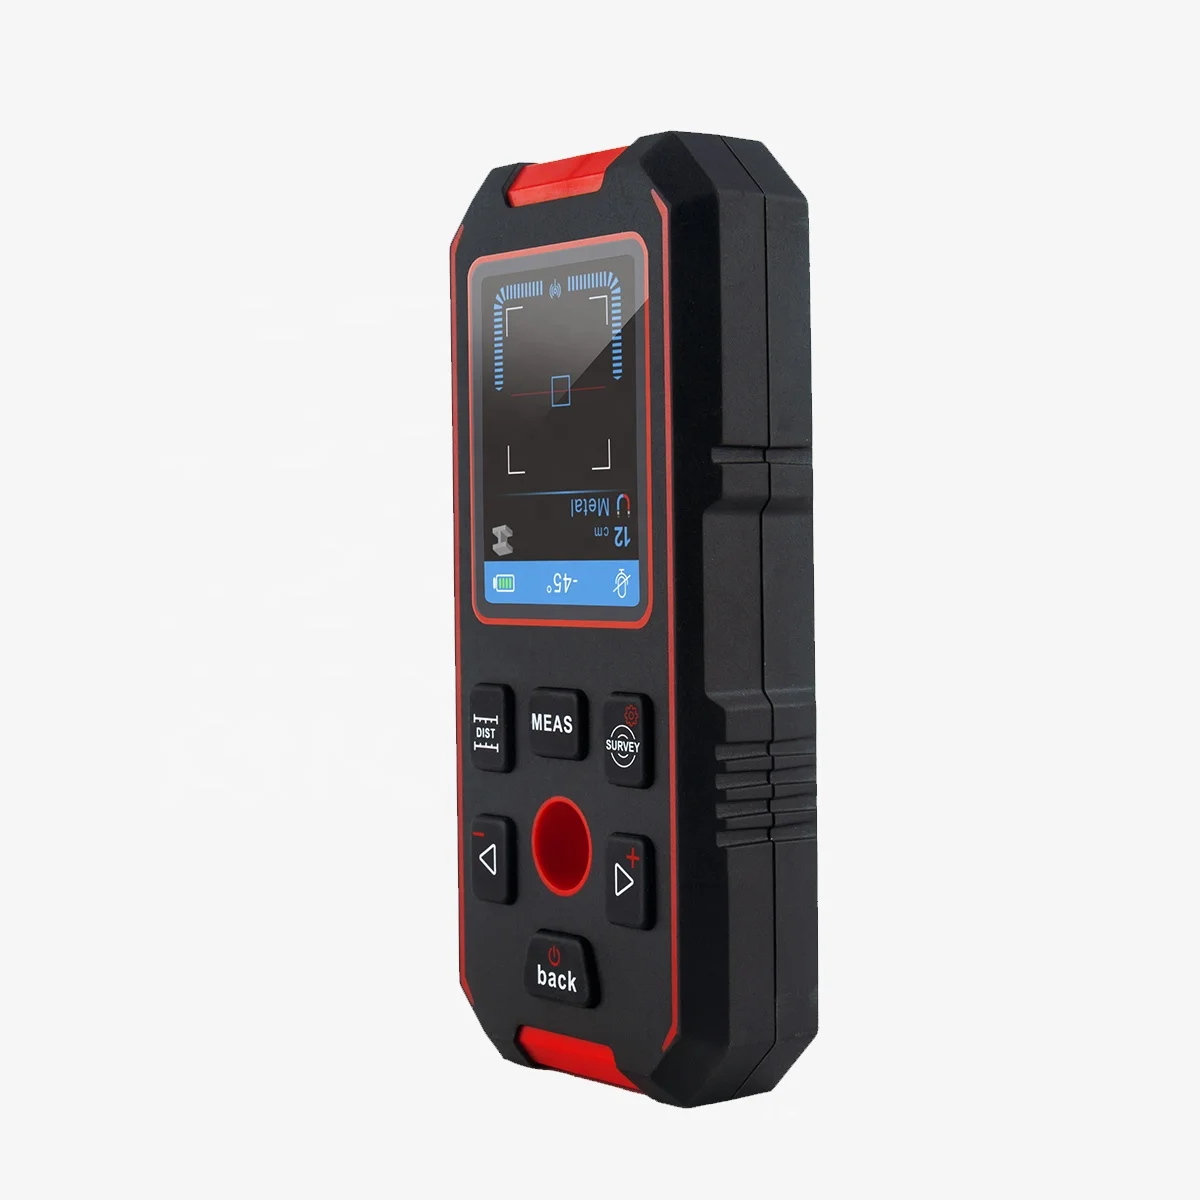 

Multi-function Measuring Instrument LCD Display Wall Detector Laser rangefinder for rebar,cable,Water Pipe detection